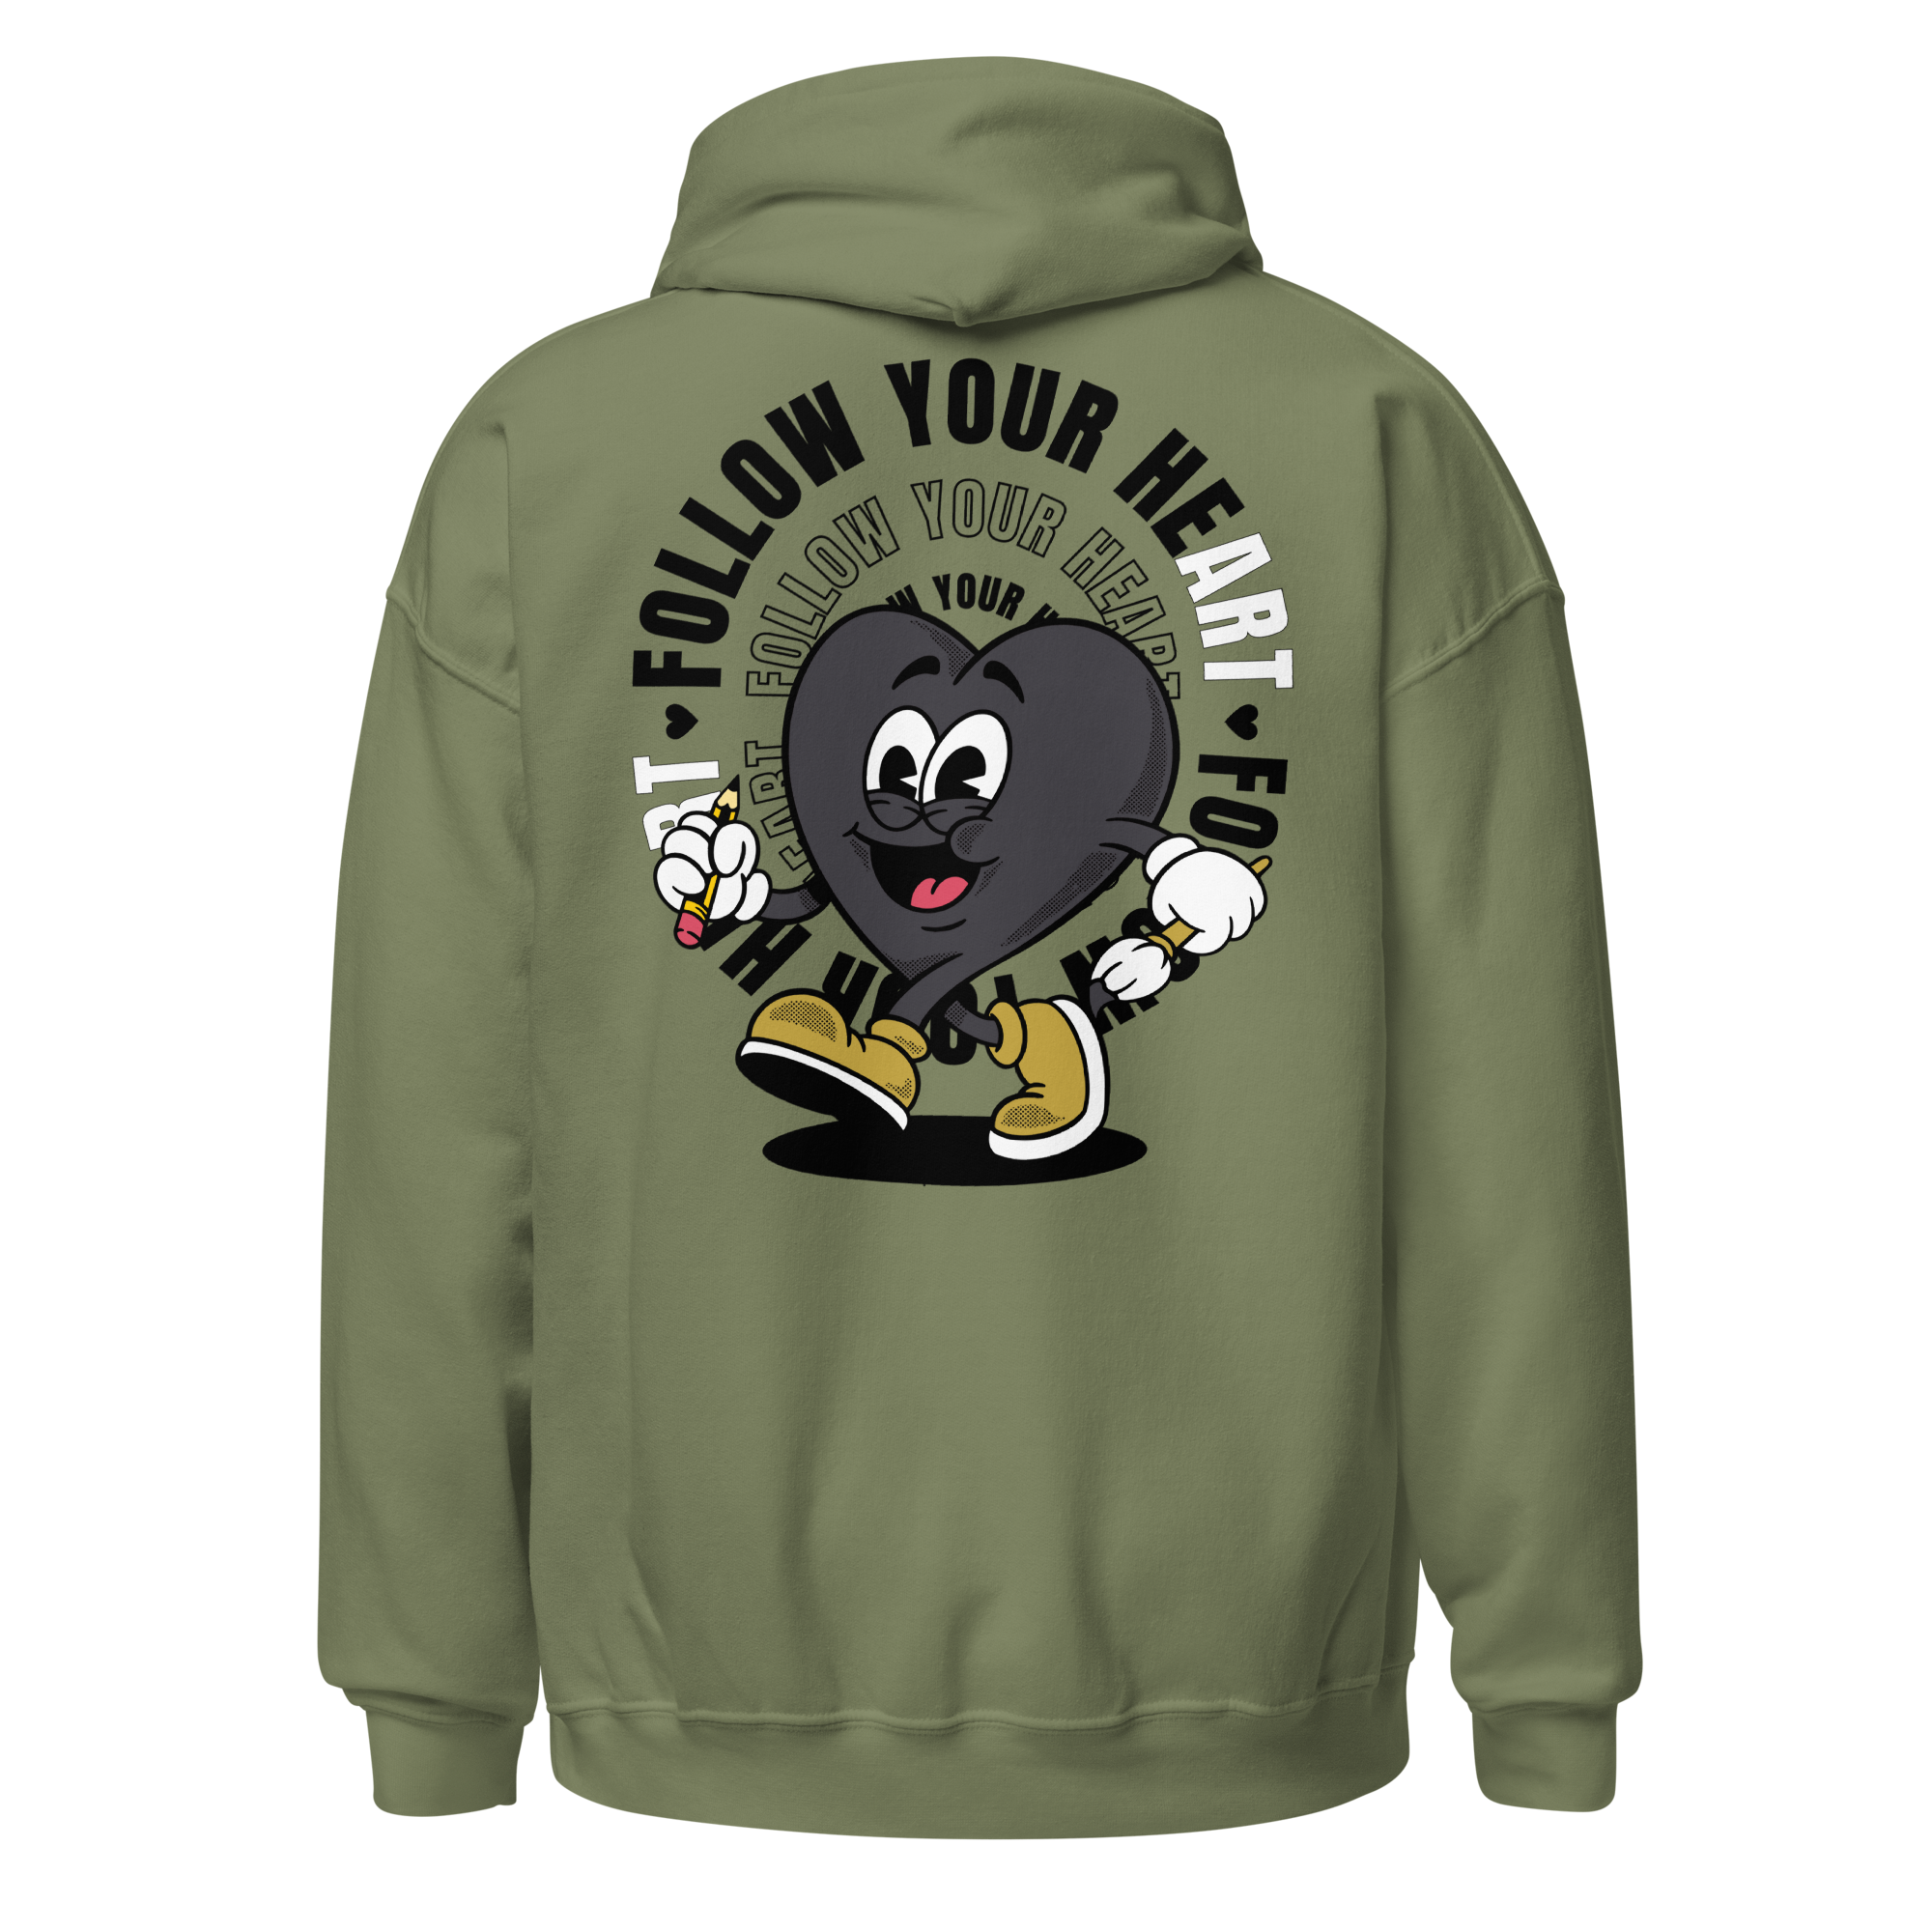 Follow Your Heart Embroidery Hoodie - Black and Military Green (Unisex)